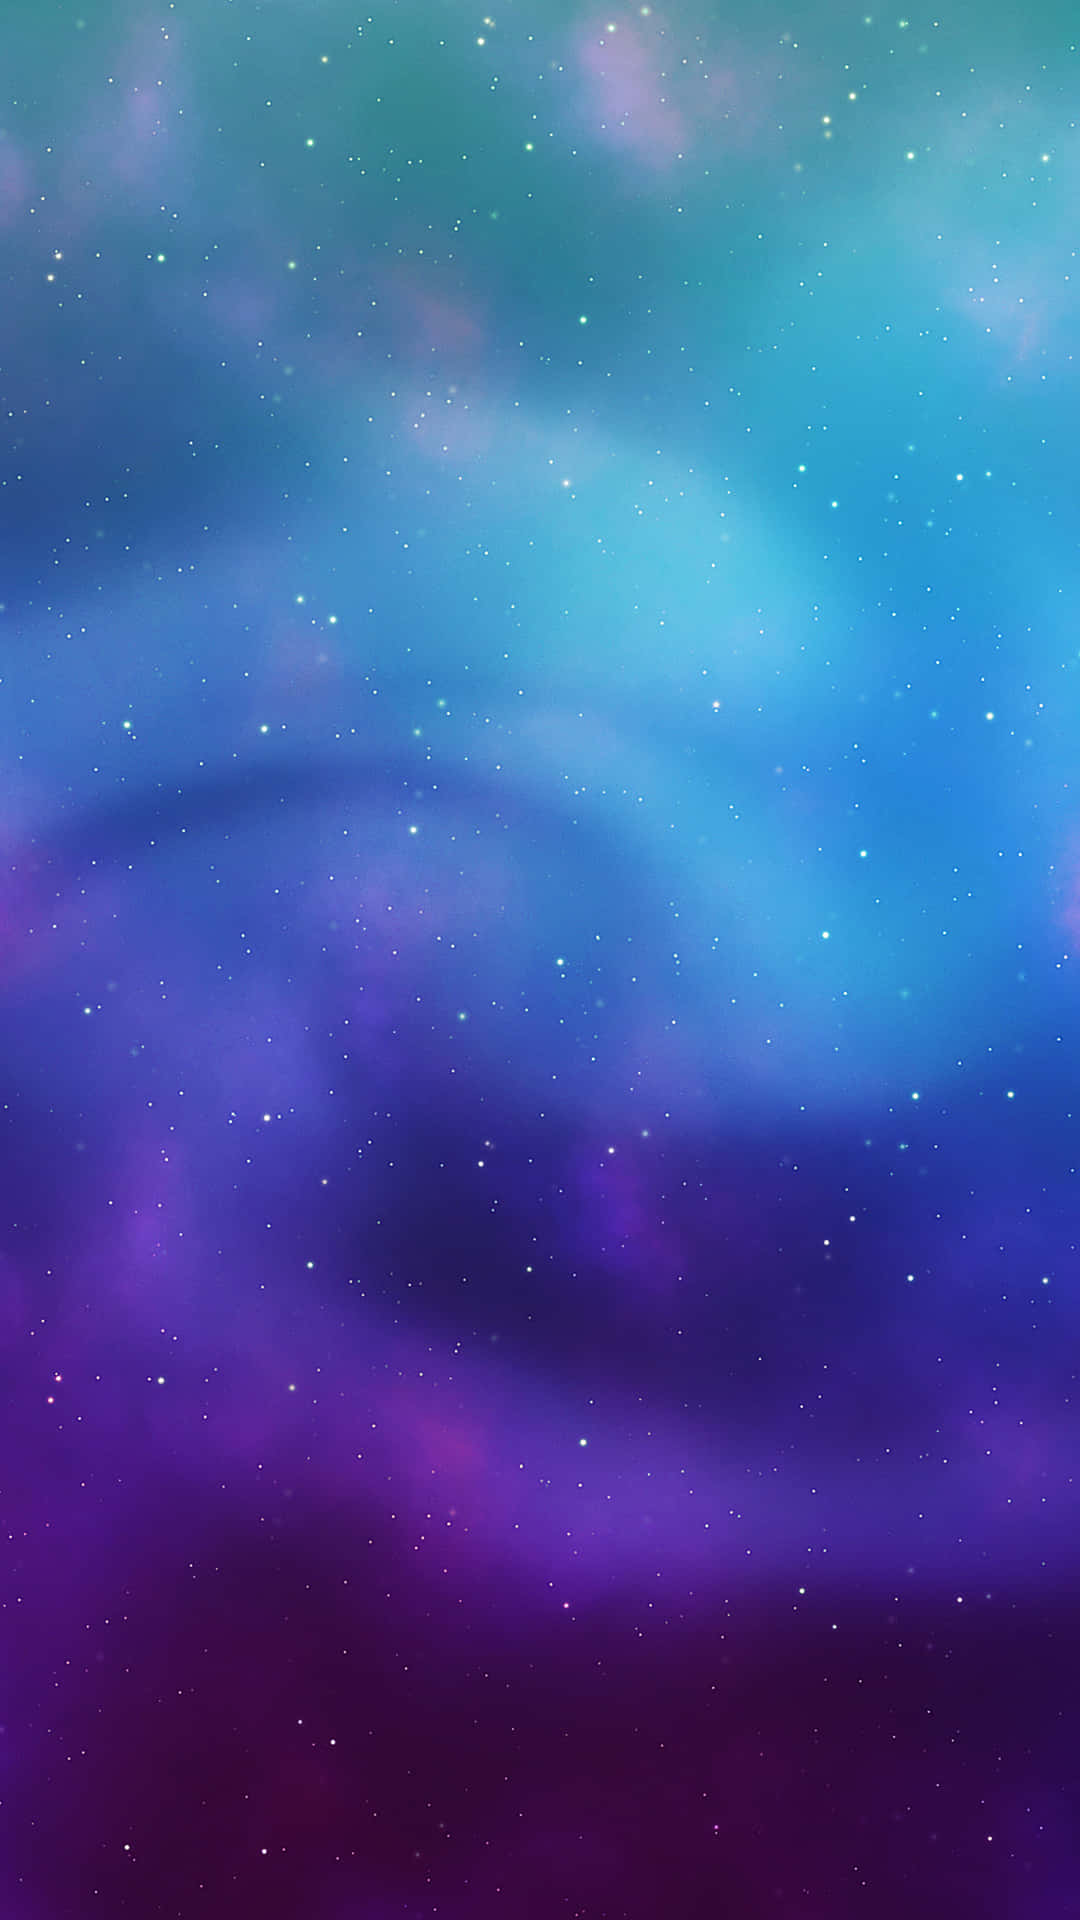 Stay connected with the world with the beautiful Blue Galaxy Iphone Wallpaper